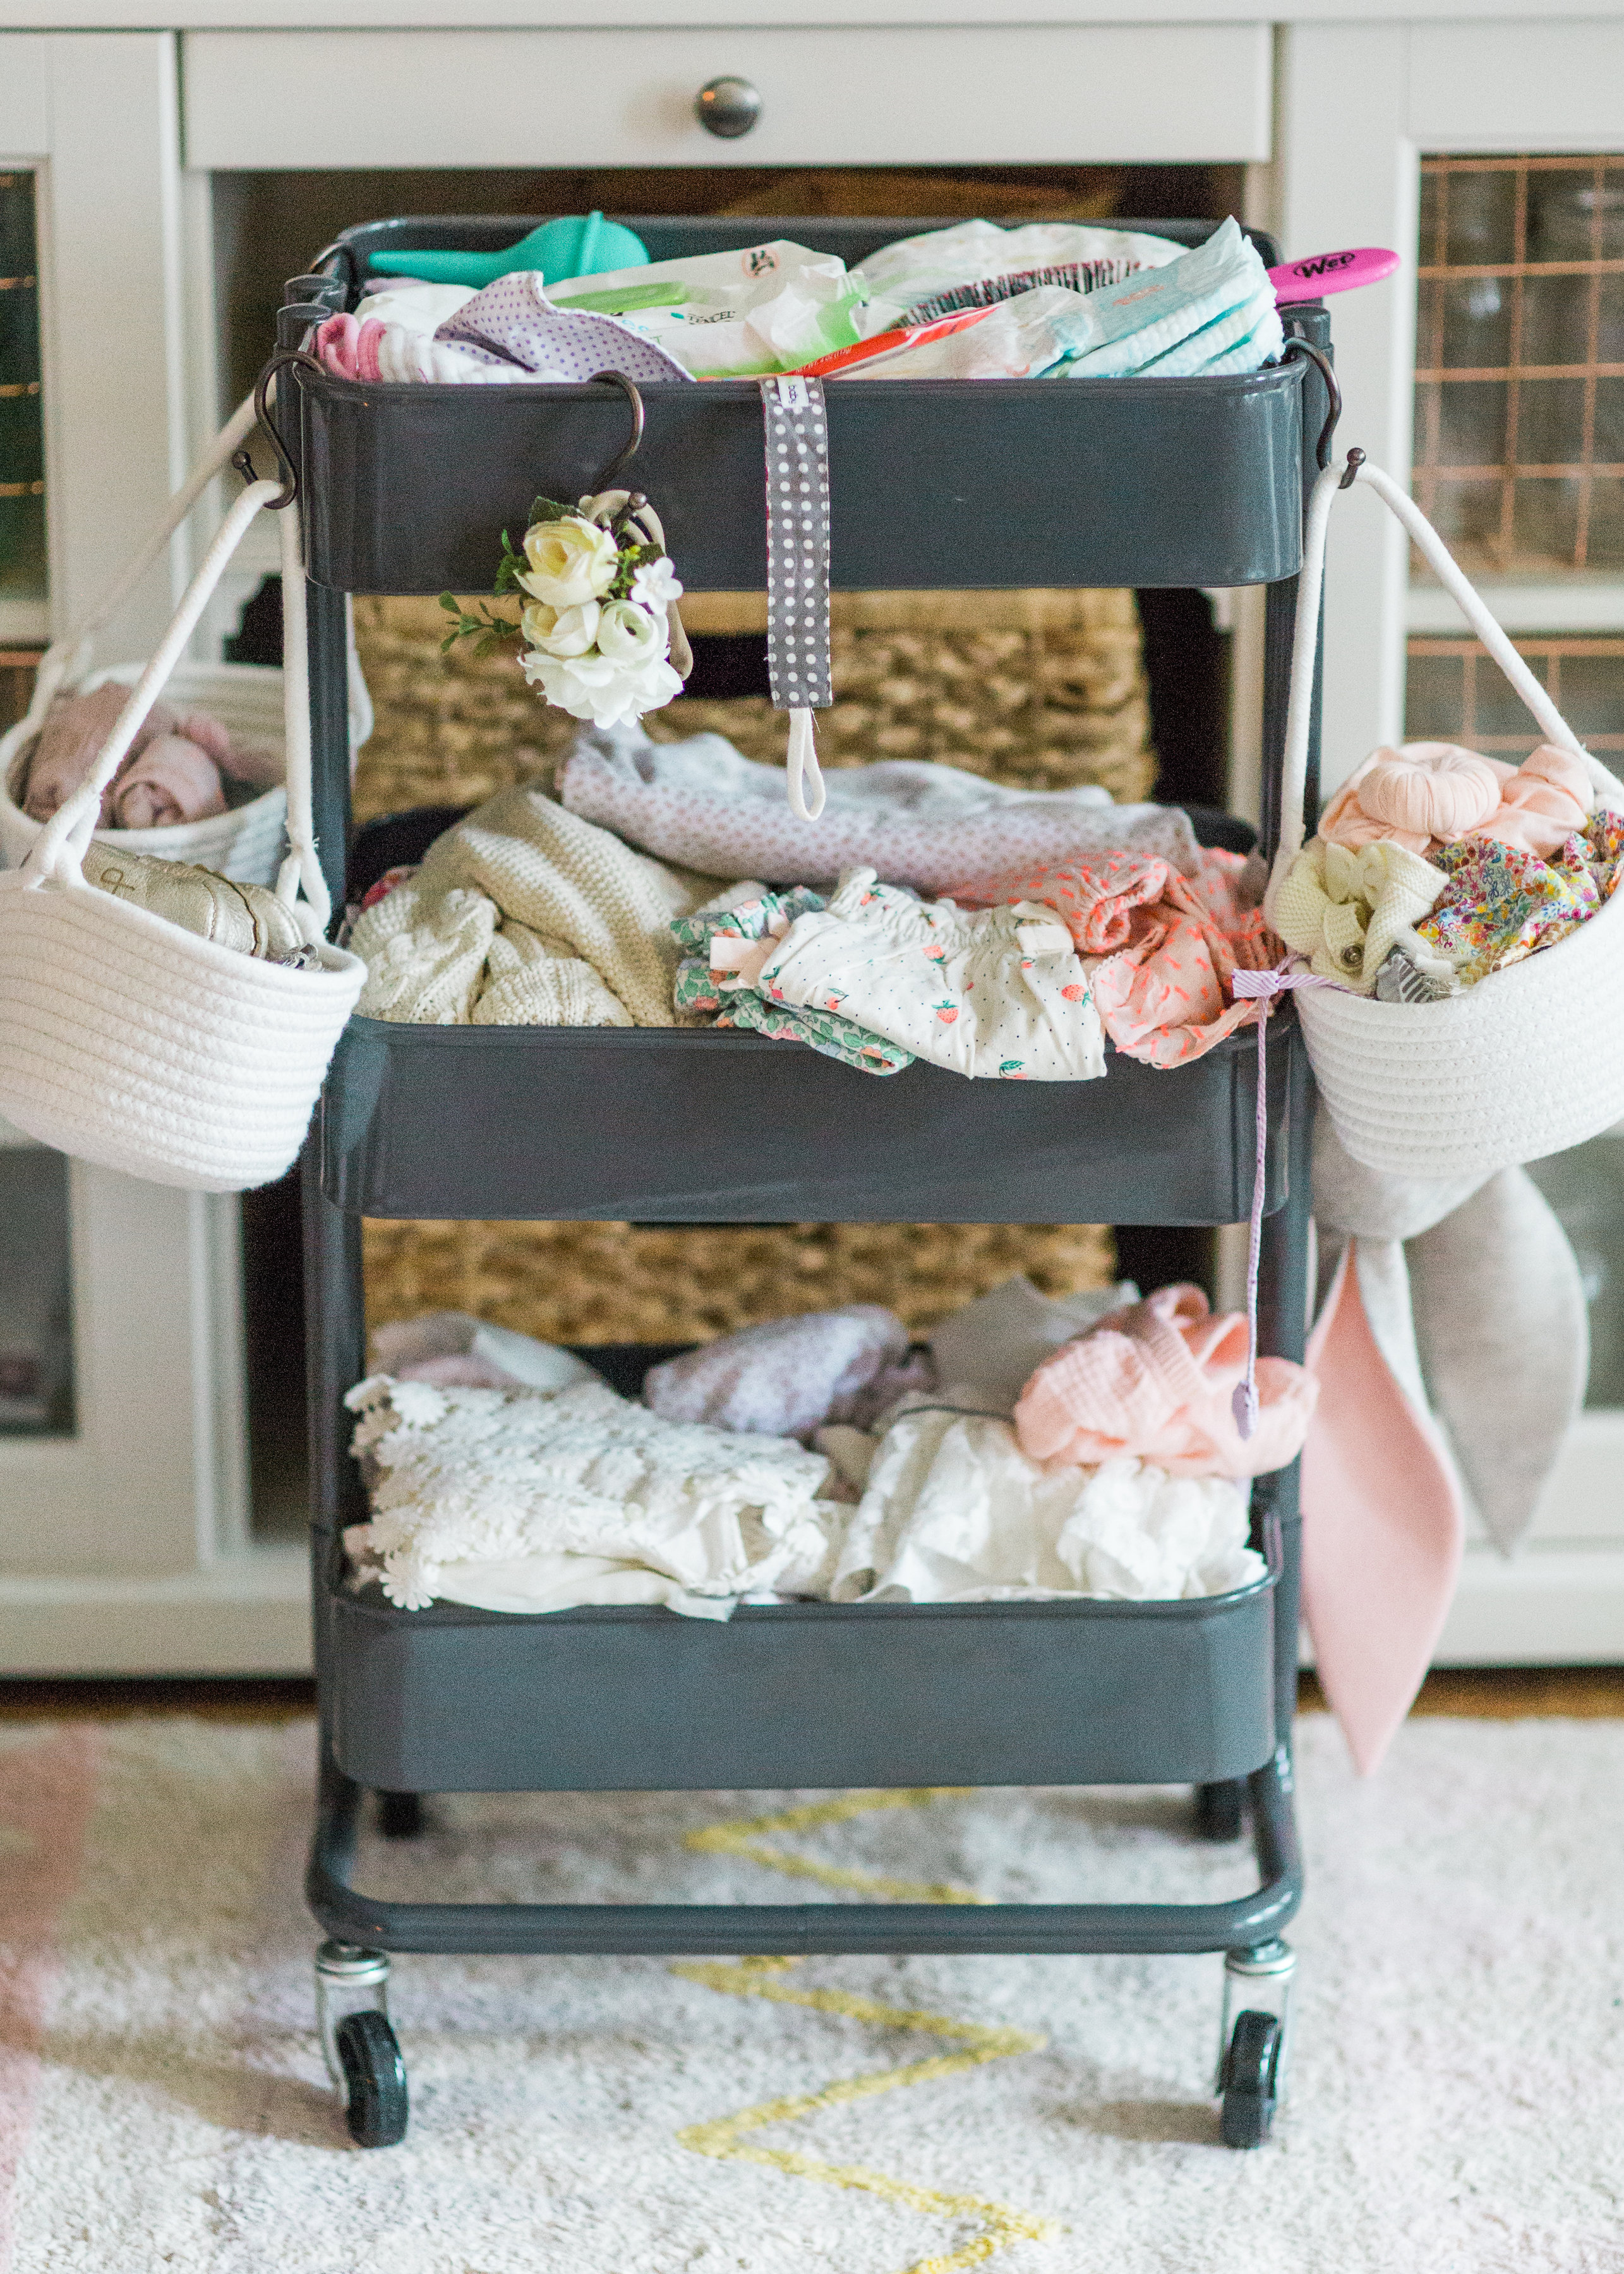 Making life easier with a new baby is the name of the game. Mom blogger Lexi of Glitter, Inc. shares a DIY new baby changing station using everyone's favorite Ikea RÅSKOG Cart. #diy #ikeahack #ikeacart #ikearaskogcart #babychangingstation #babychangingcart #changingstation #changingcart #diaperorganization #baby #newbaby | Click through for the details. | glitterinc.com | @glitterinc